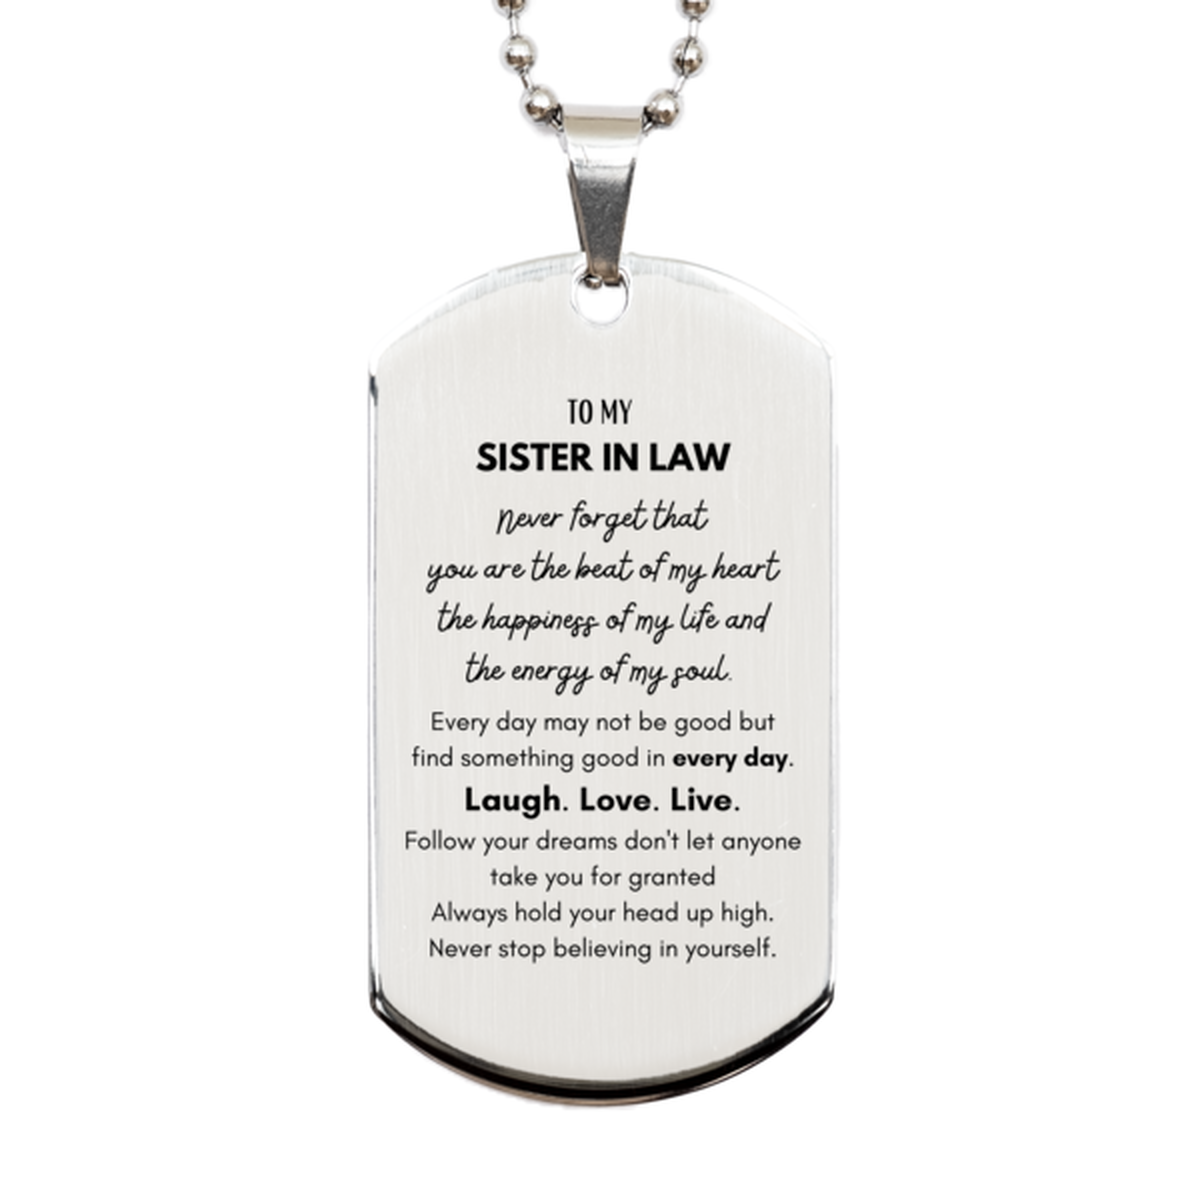 To My Sister In Law Dogtag Gifts, Christmas Sister In Law Silver Dog Tag Present, Birthday Unique Motivational For Sister In Law, To My Sister In Law Never forget that you are the beat of my heart the happiness of my life and the energy of my soul